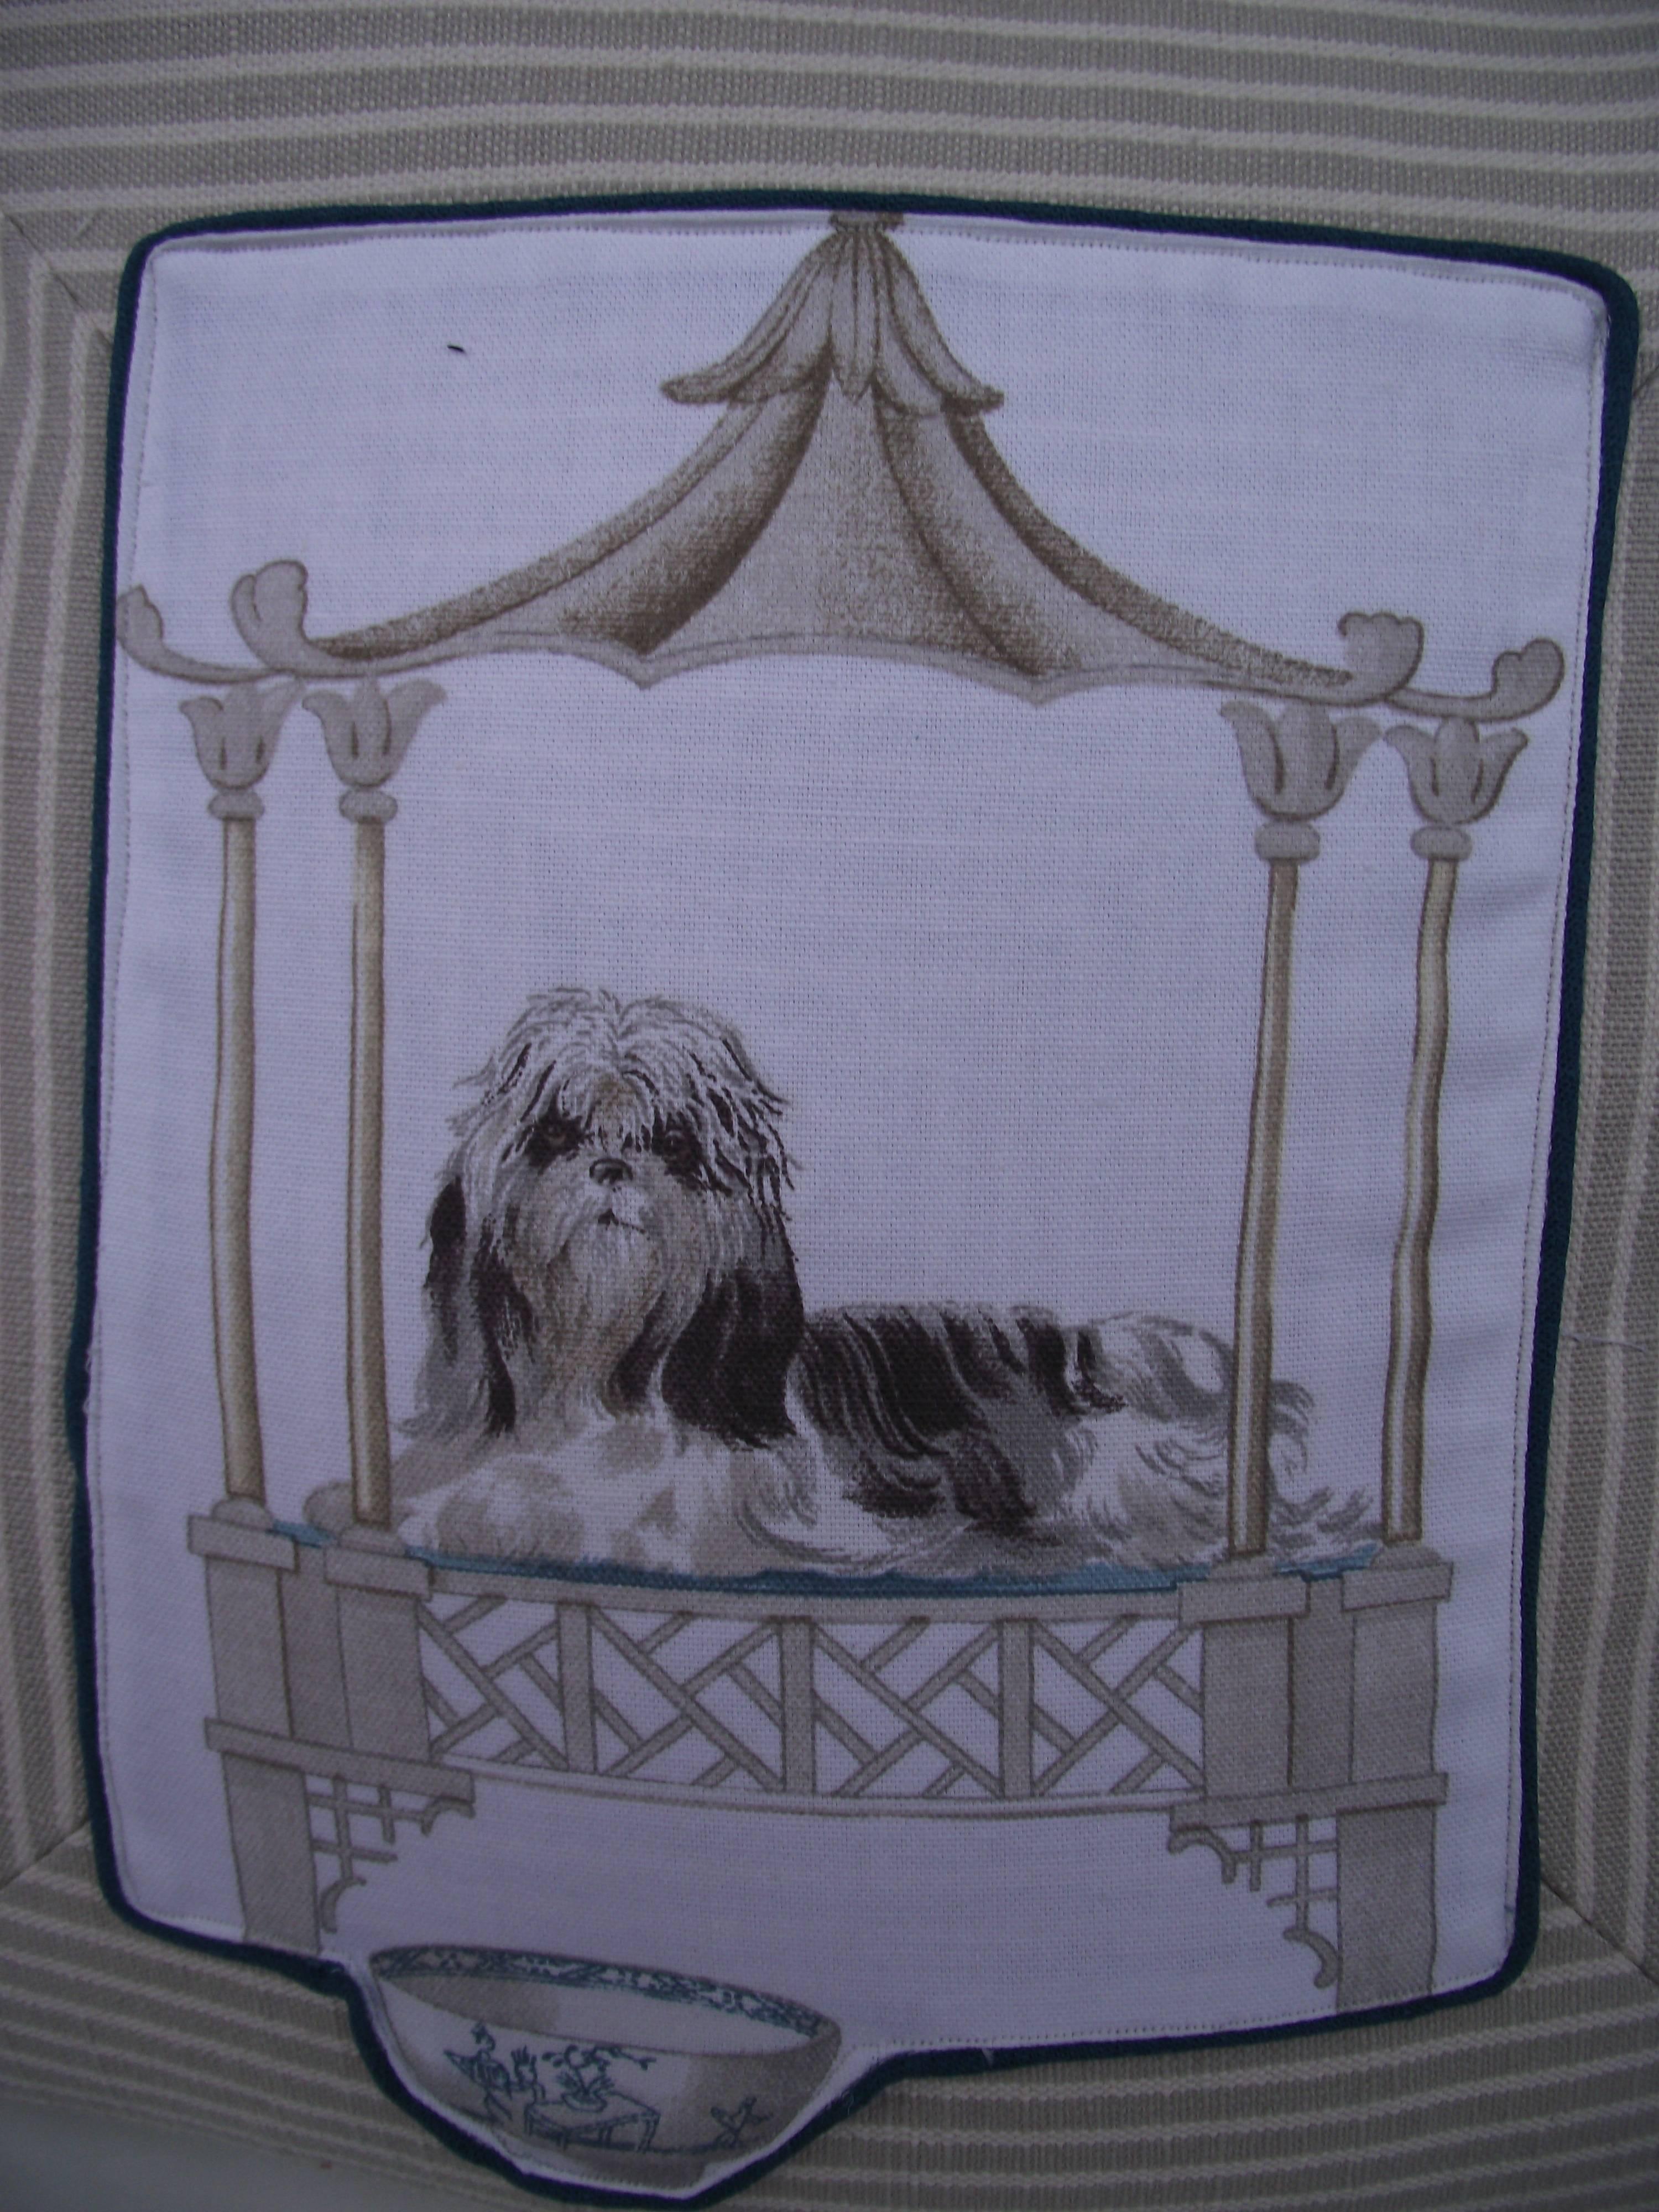 Using a vintage novelty print by Robert Allen Fabrics each pillow features one of the many breeds represented in the fabric. The design is sewn to a light beige and white upholstery grade linen. The stripe is mitered on the front of the pillow and